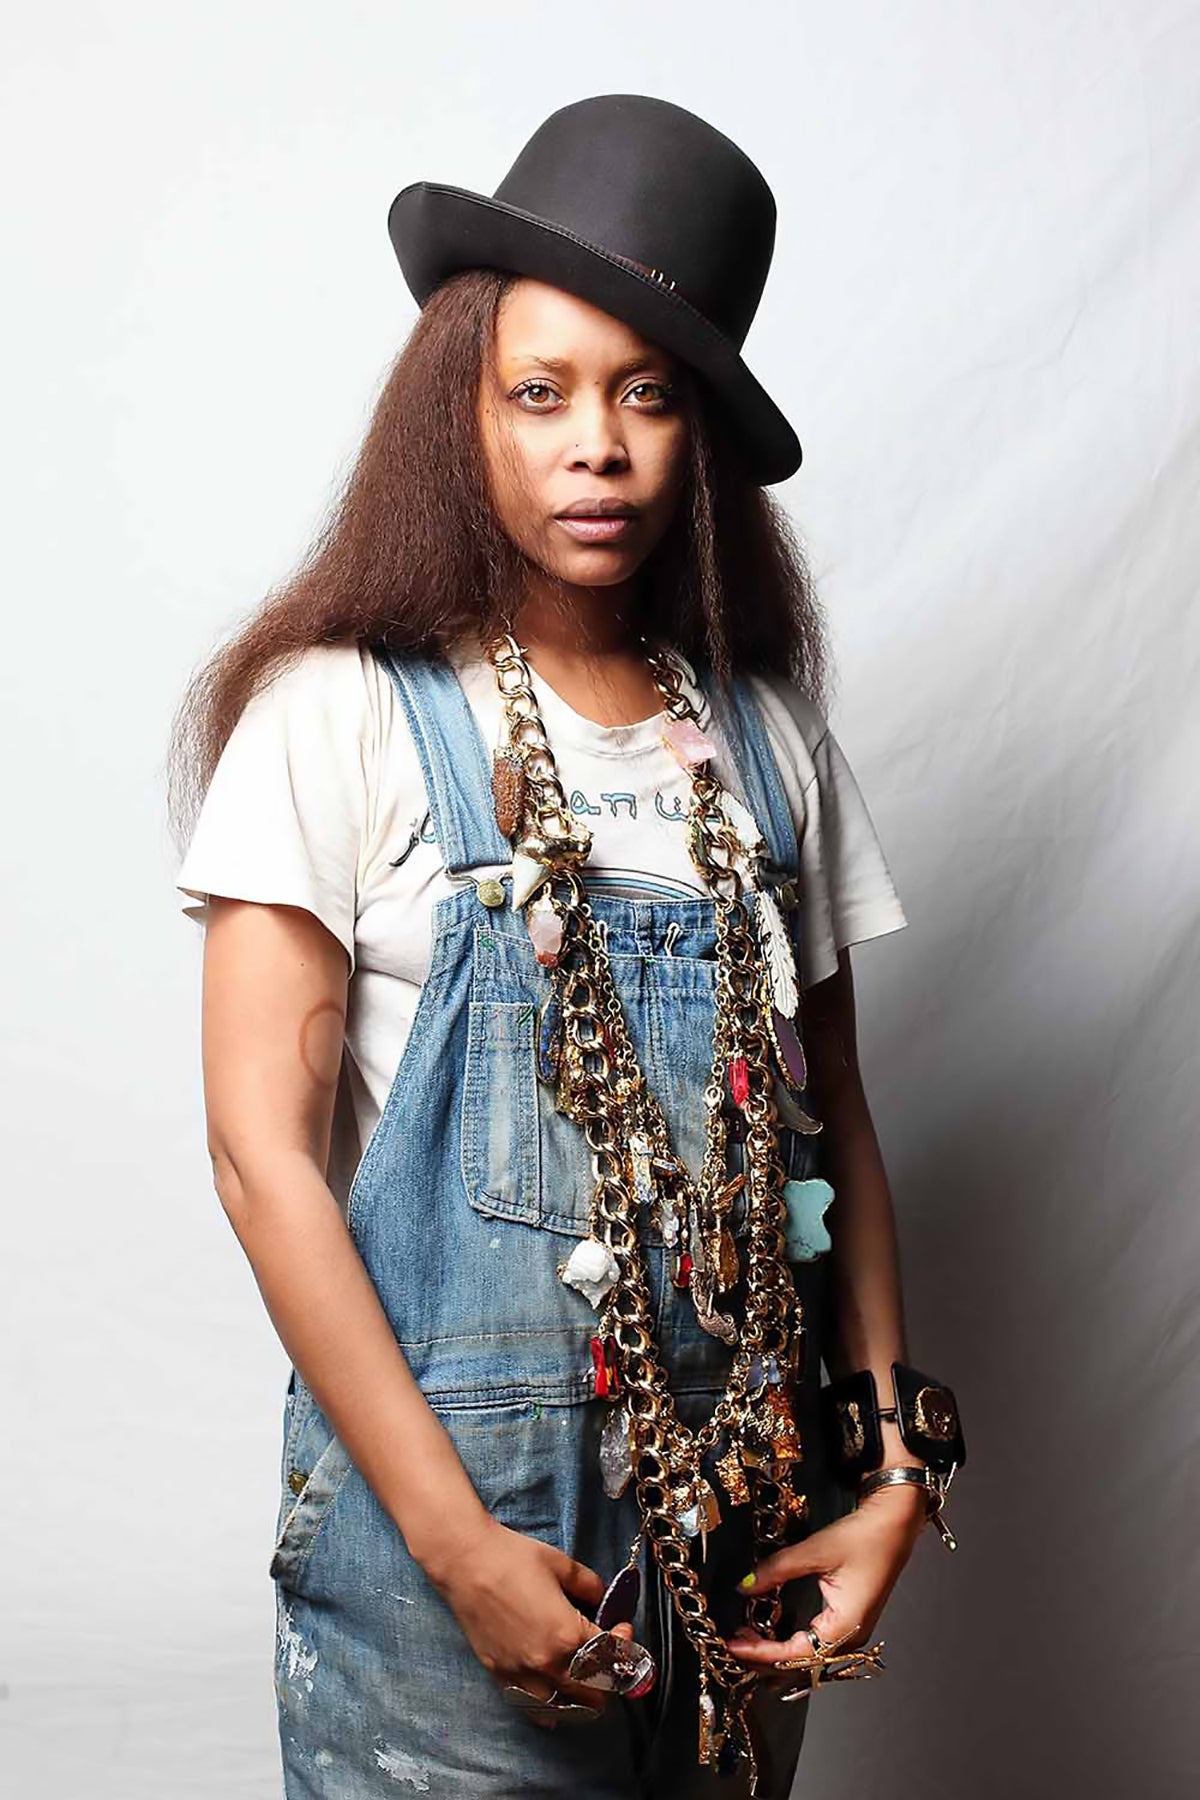 5 Life Lessons from Erykah Badu